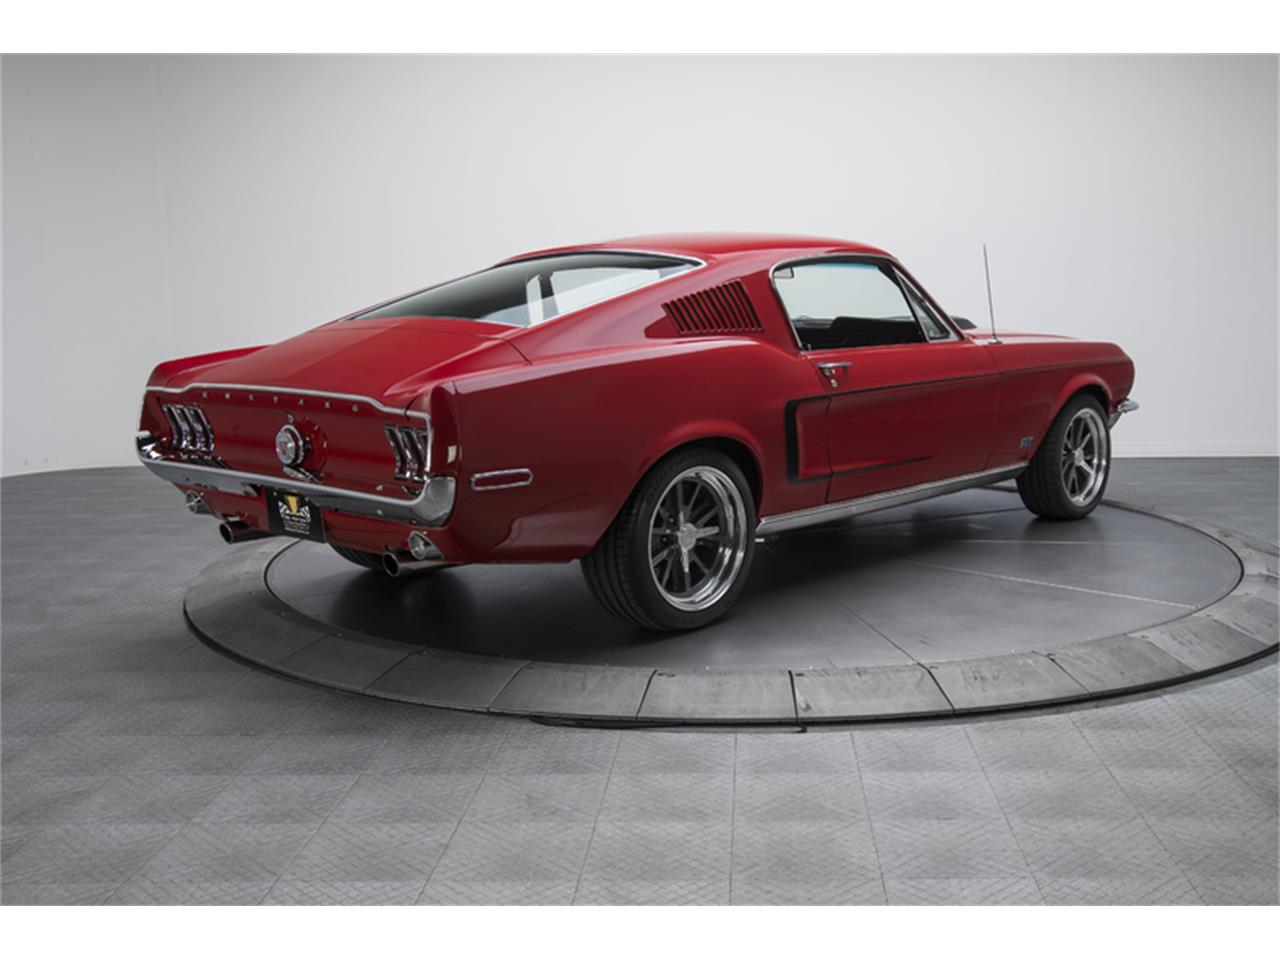 1968 Mustang 9 Inch Rear End